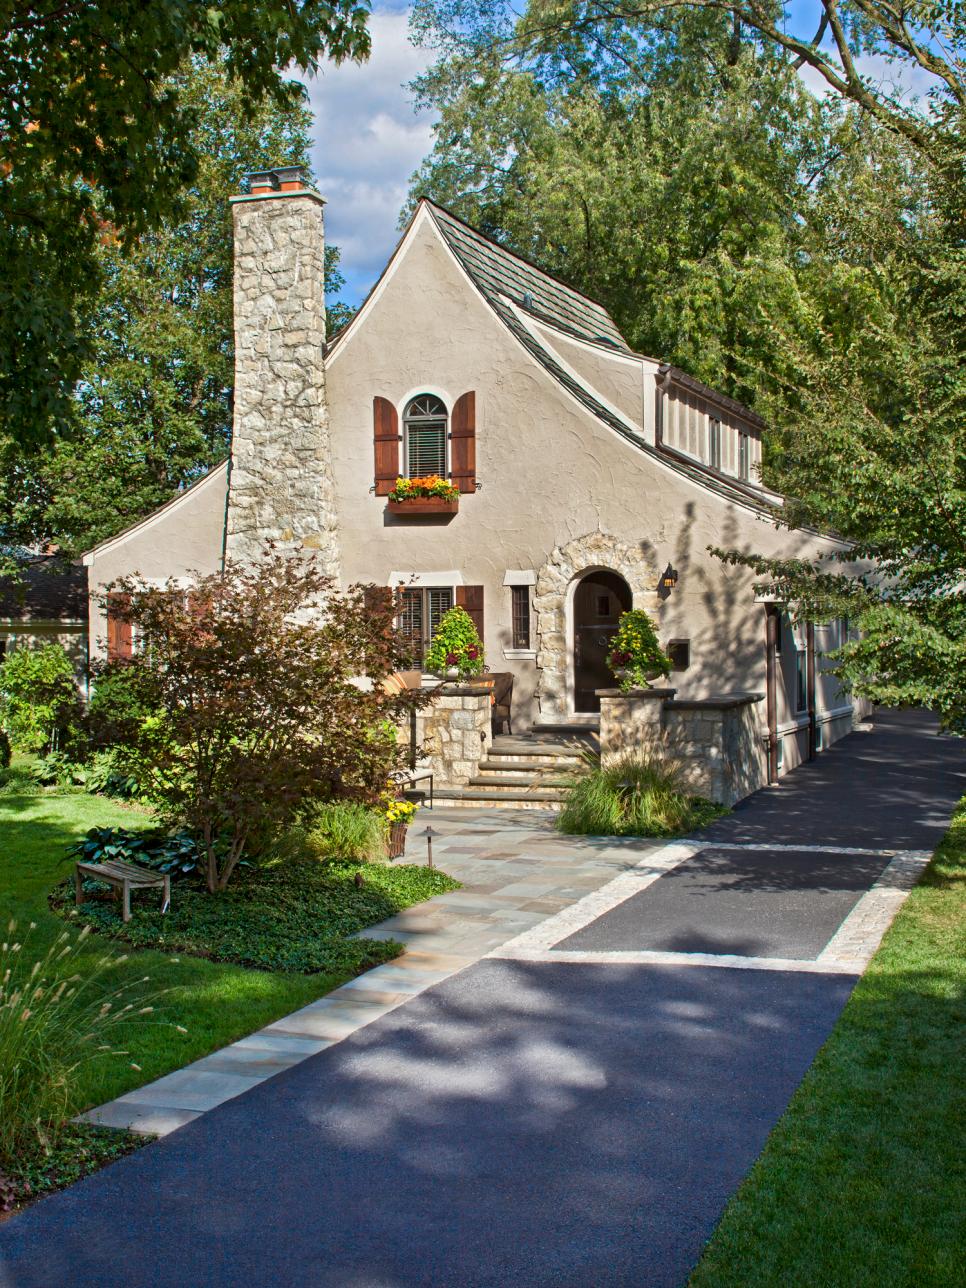 Neutral Stone and Stucco Cottage with Entry Garden and Wood Accents